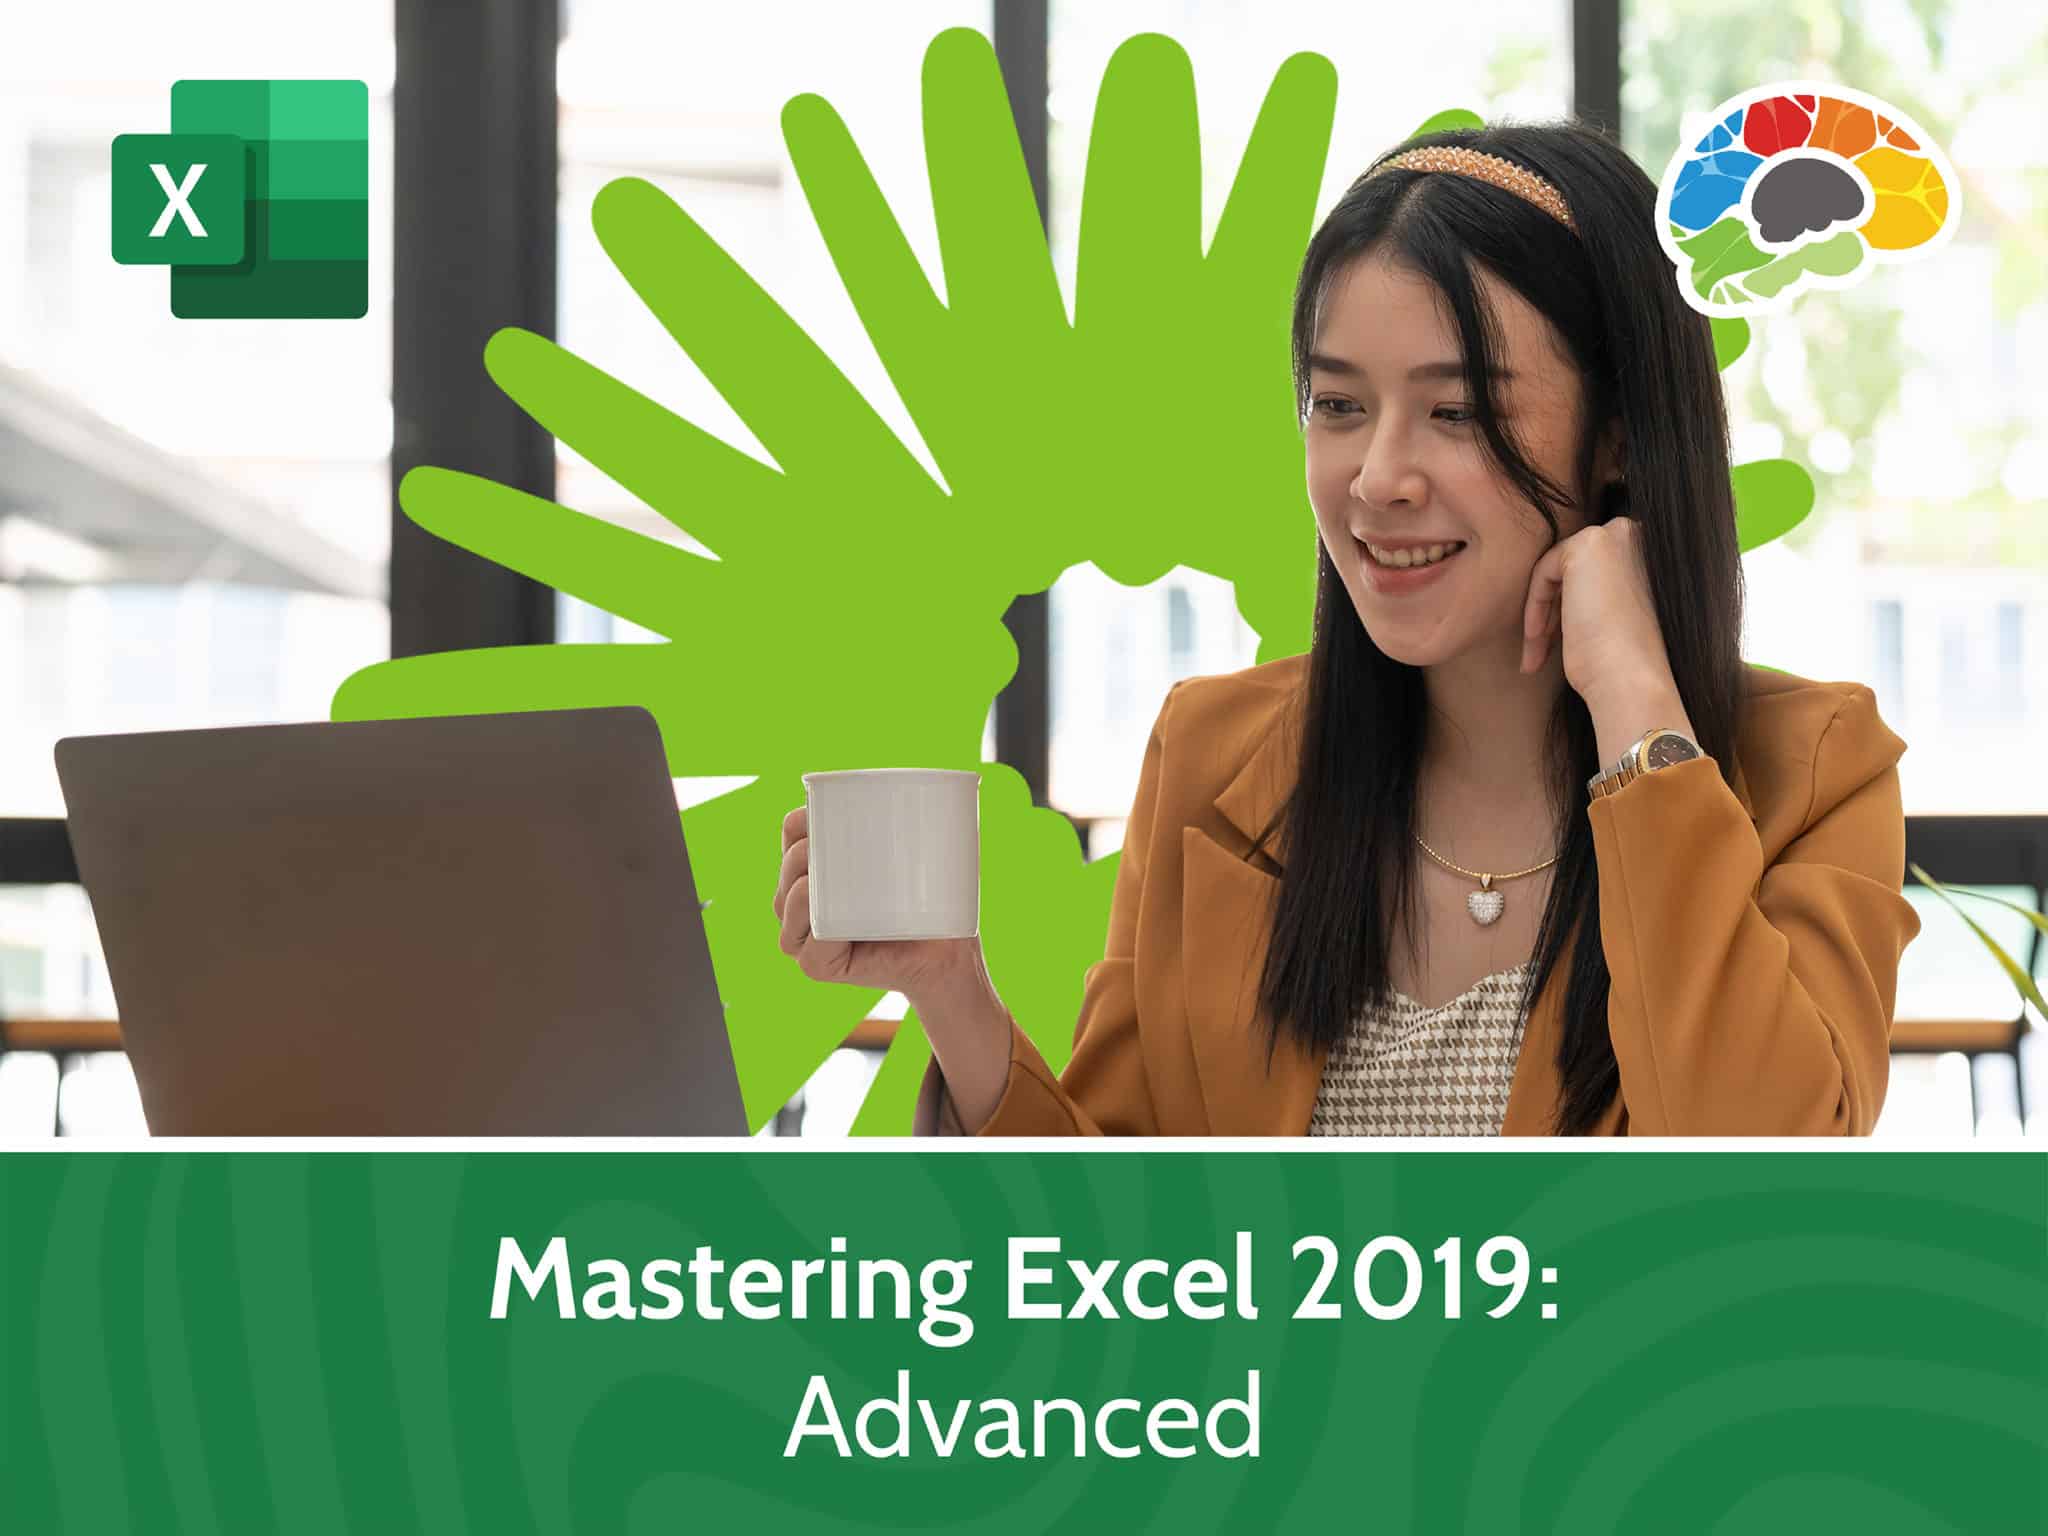 Mastering Excel 2019 – Advanced scaled